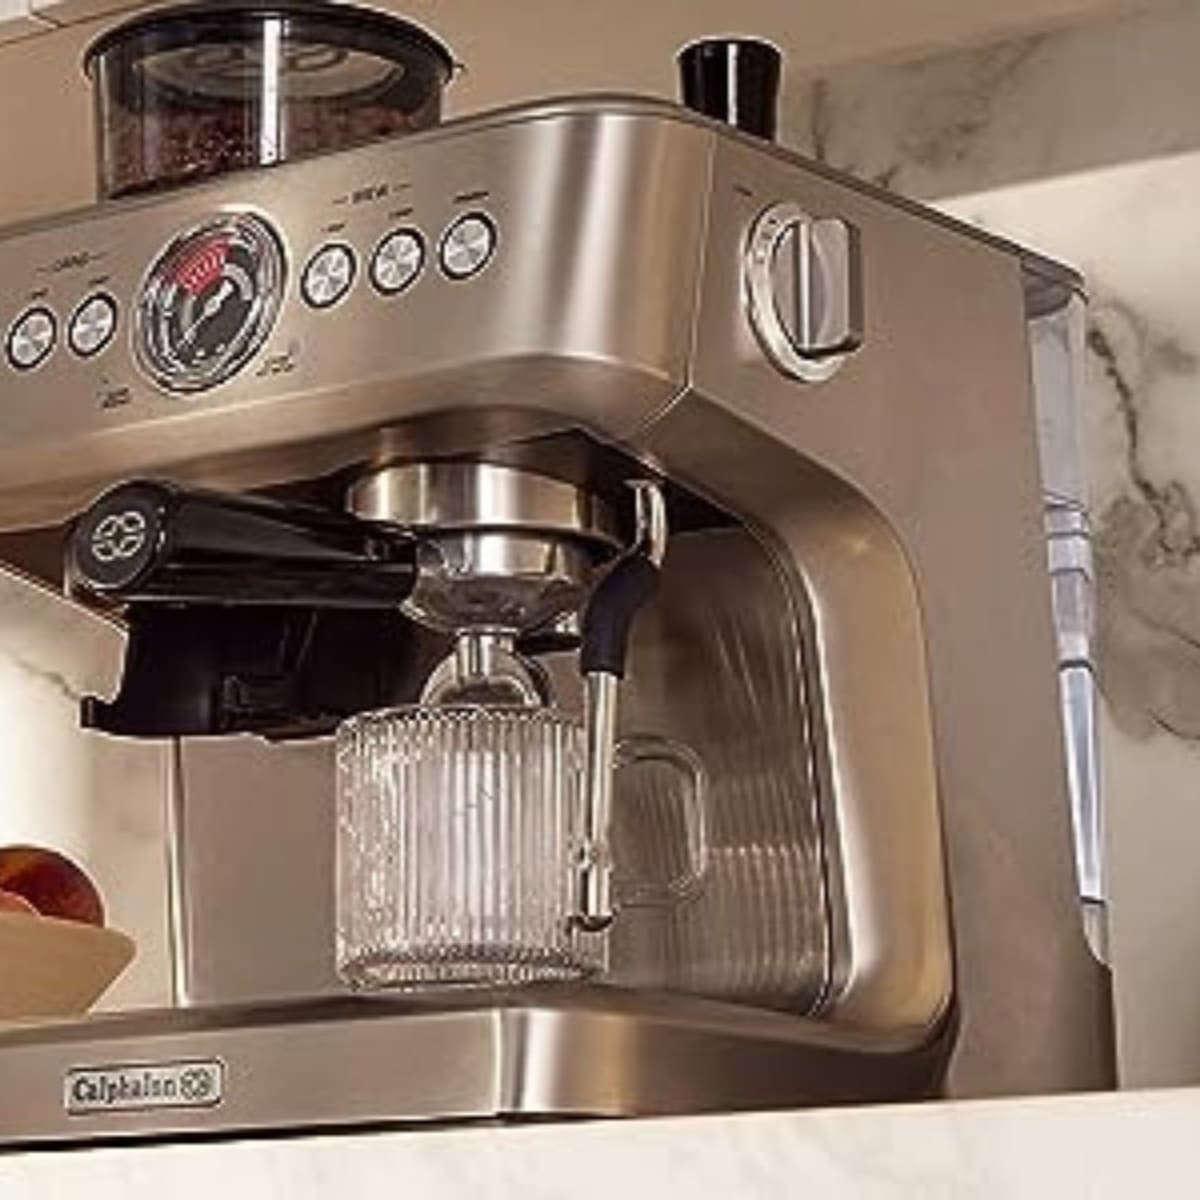 If You Act Fast, You Can Get This Calphalon Espresso Machine for $200 Off  During  Prime Day